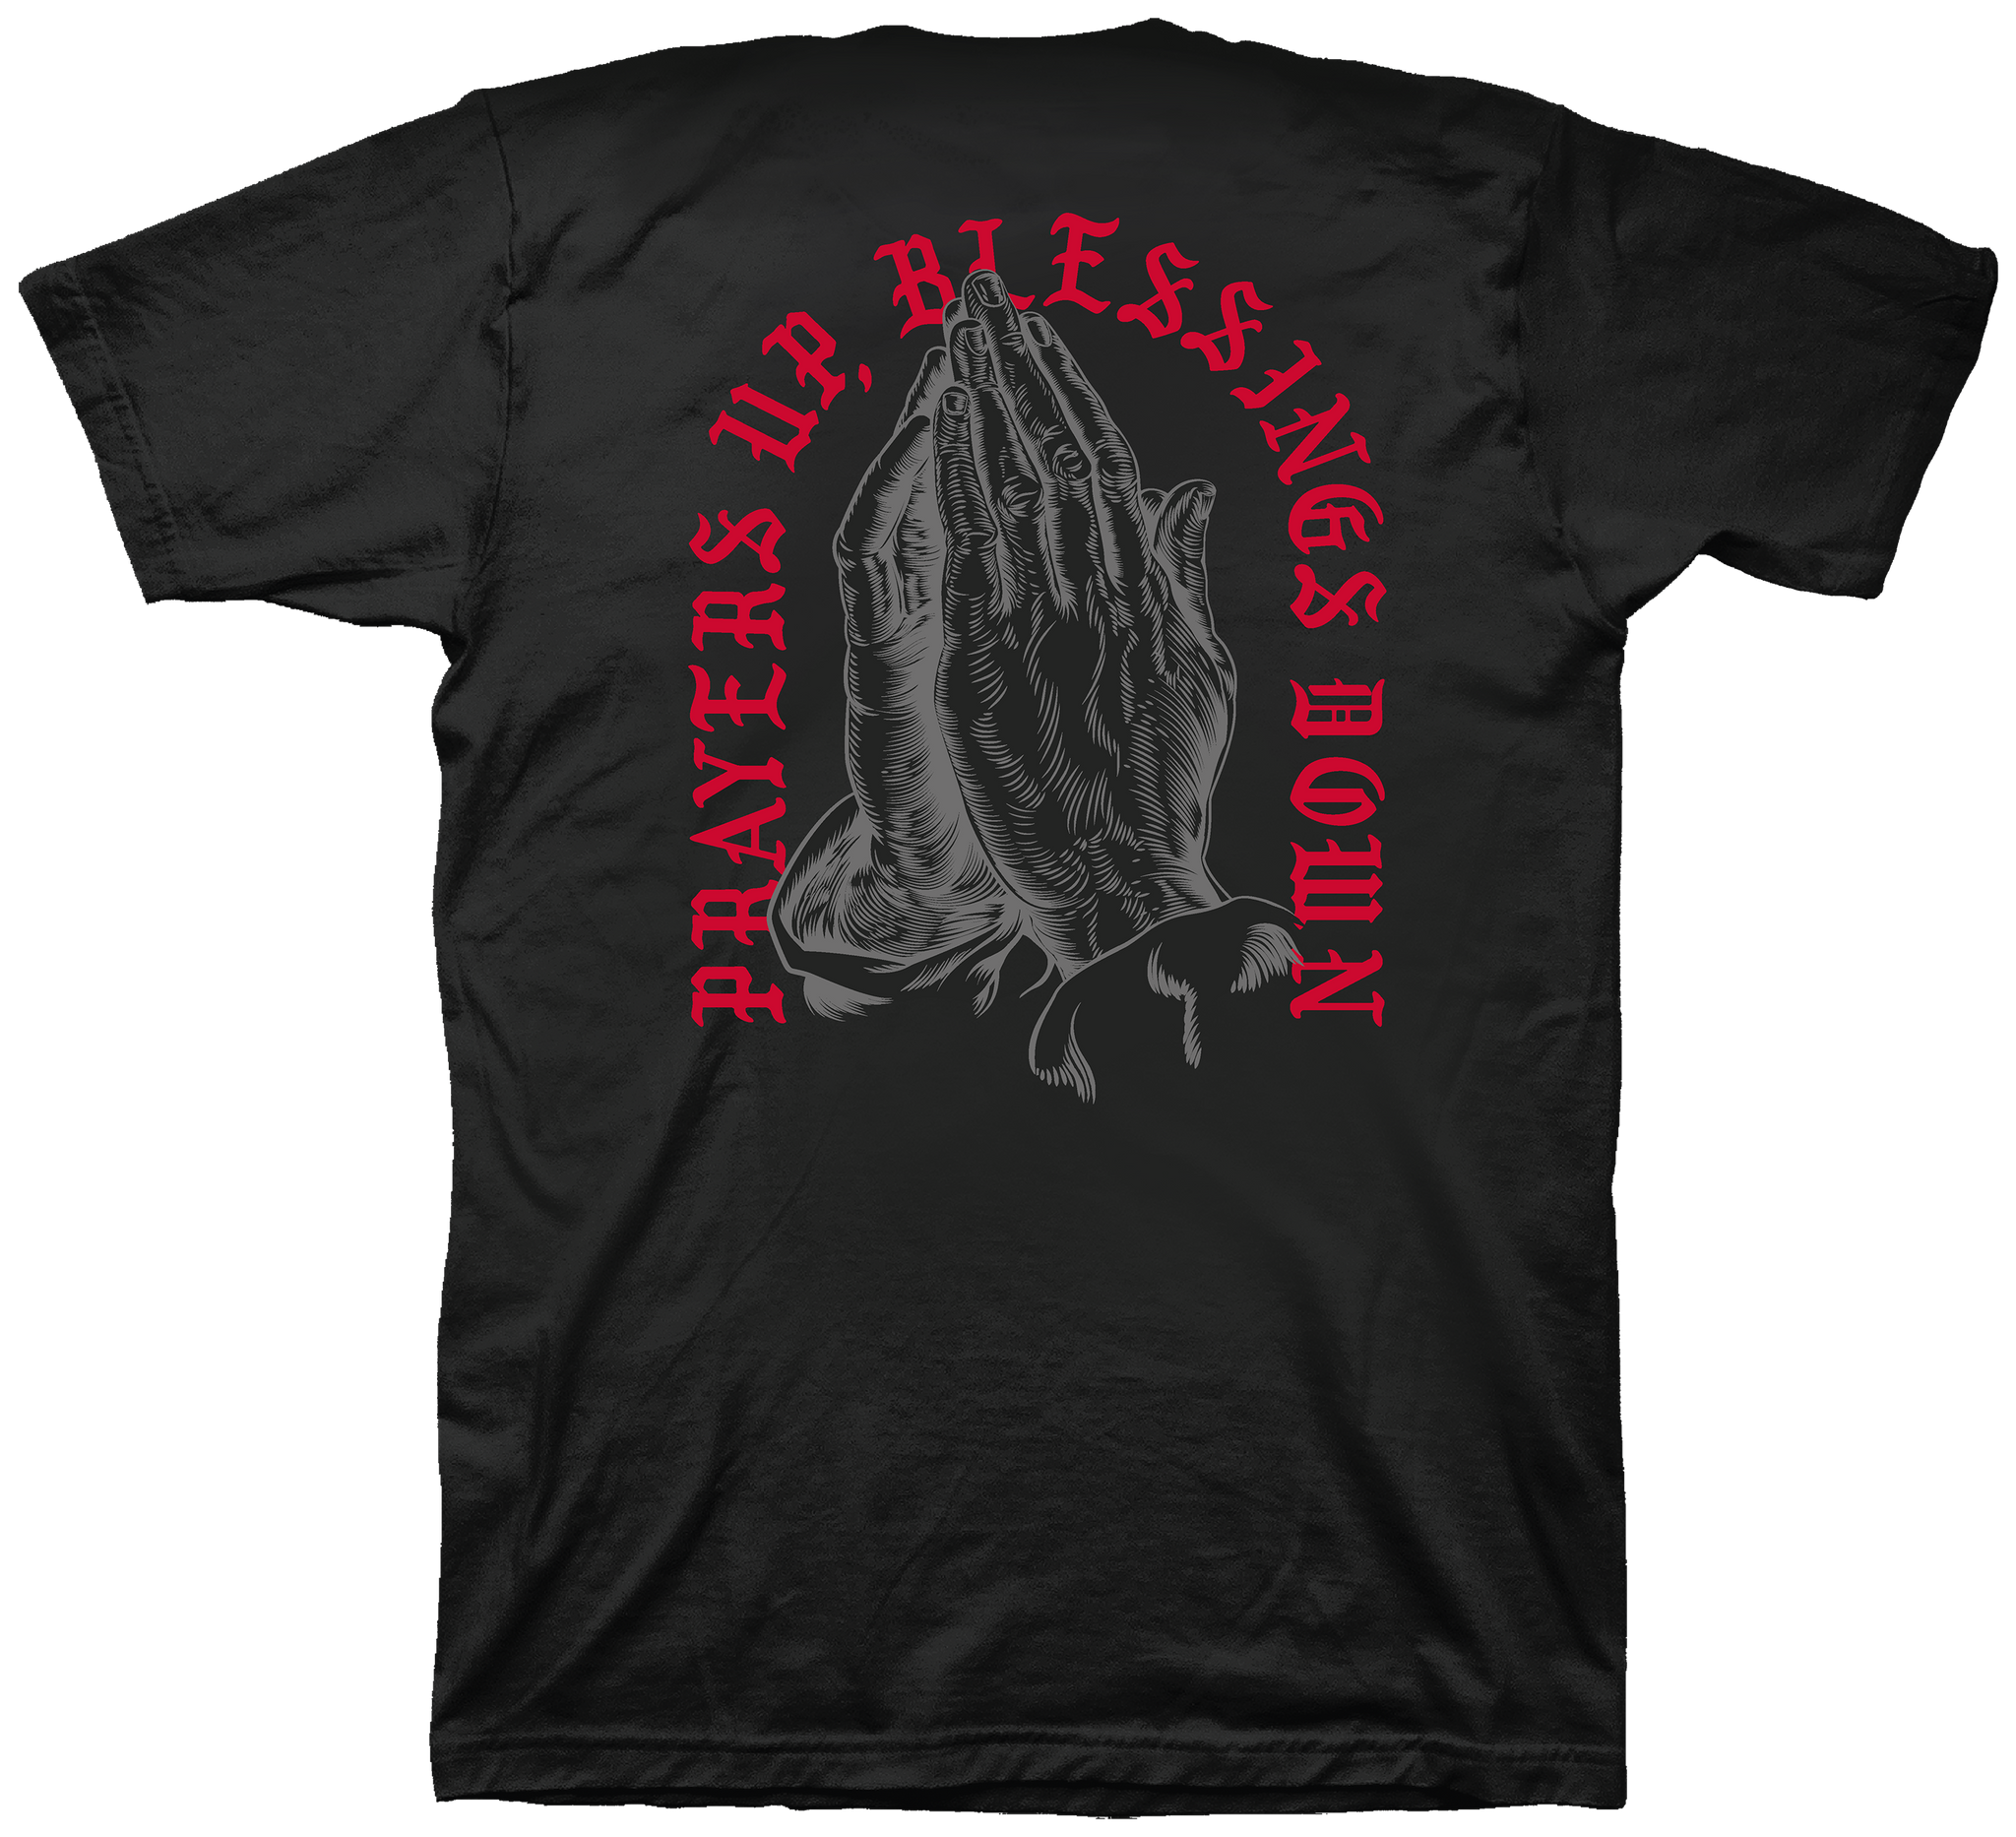 Prayers Up, Blessings Down (Tshirt) - Lucky Soul